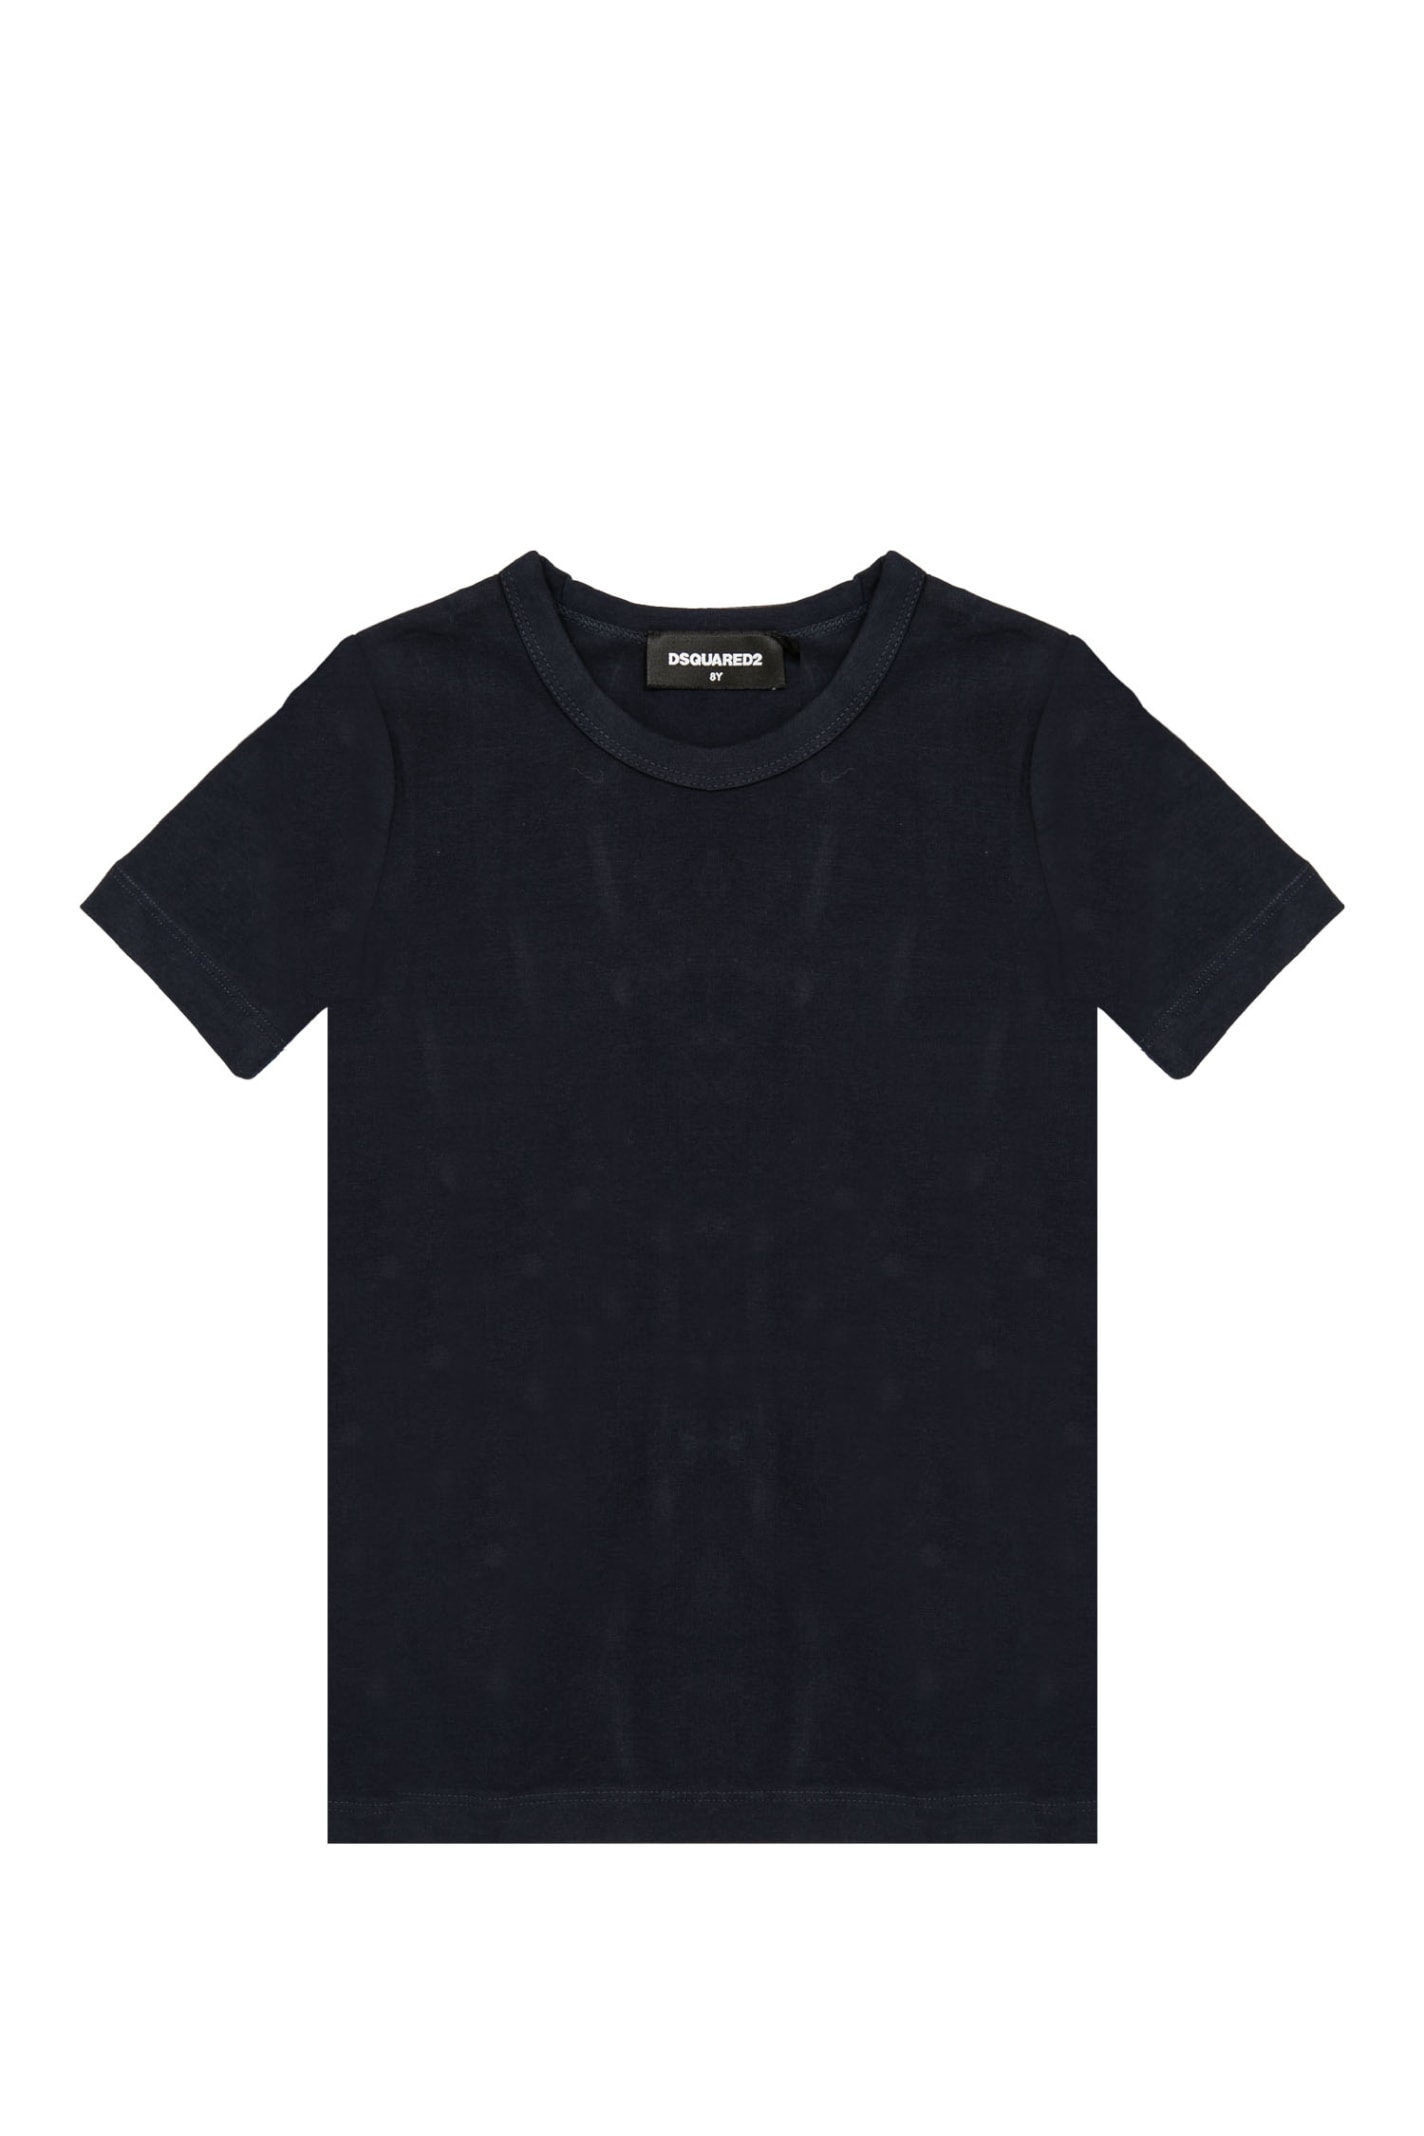 Dsquared2 Kids' Cotton T-shirt In Back